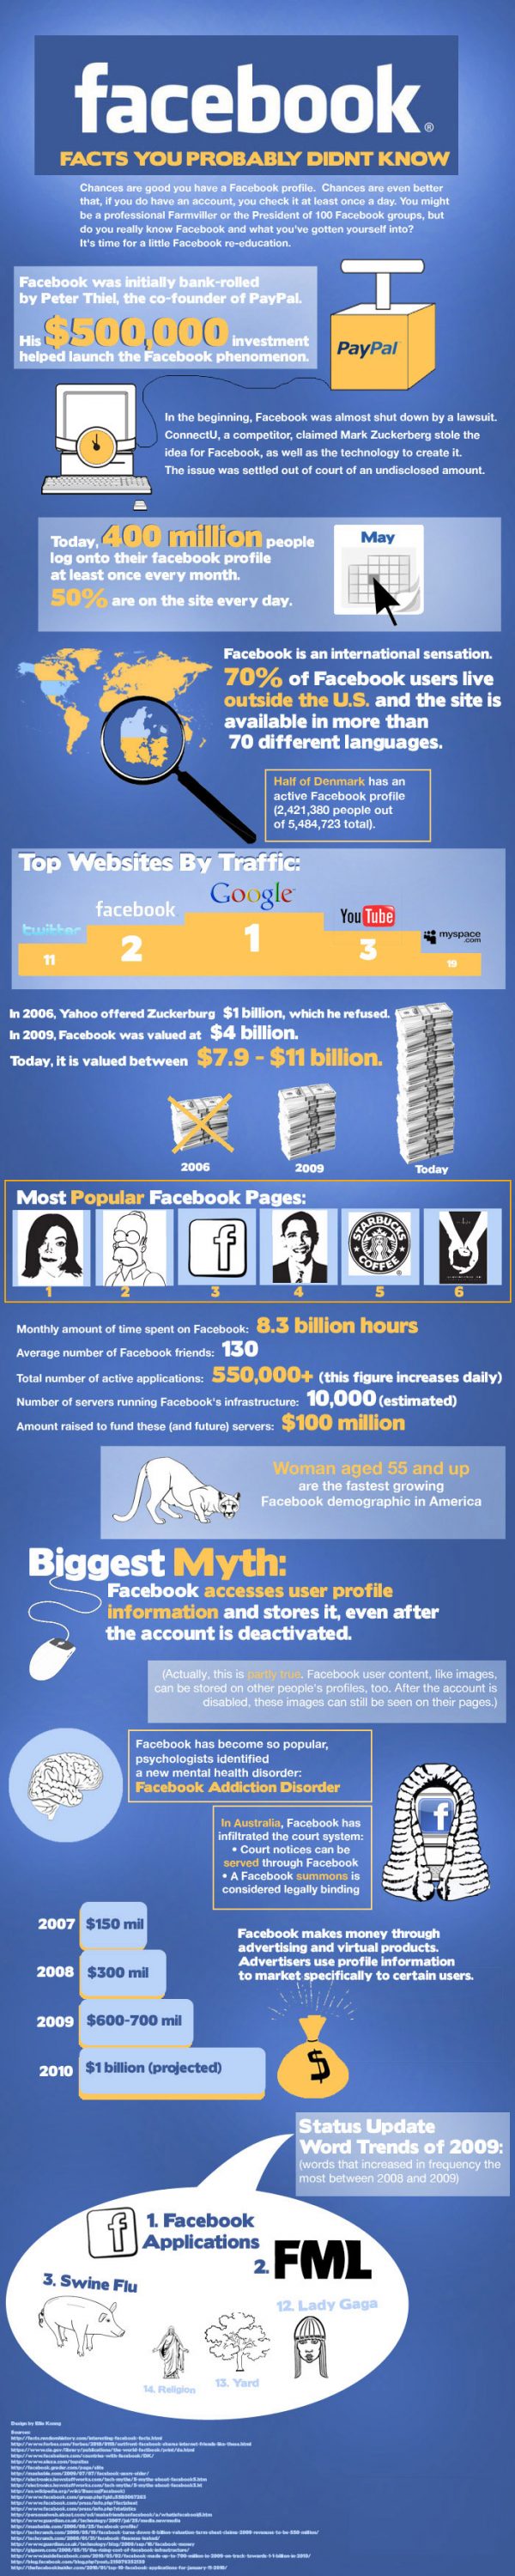 Facebook facts you probably didn't know (Infographic)